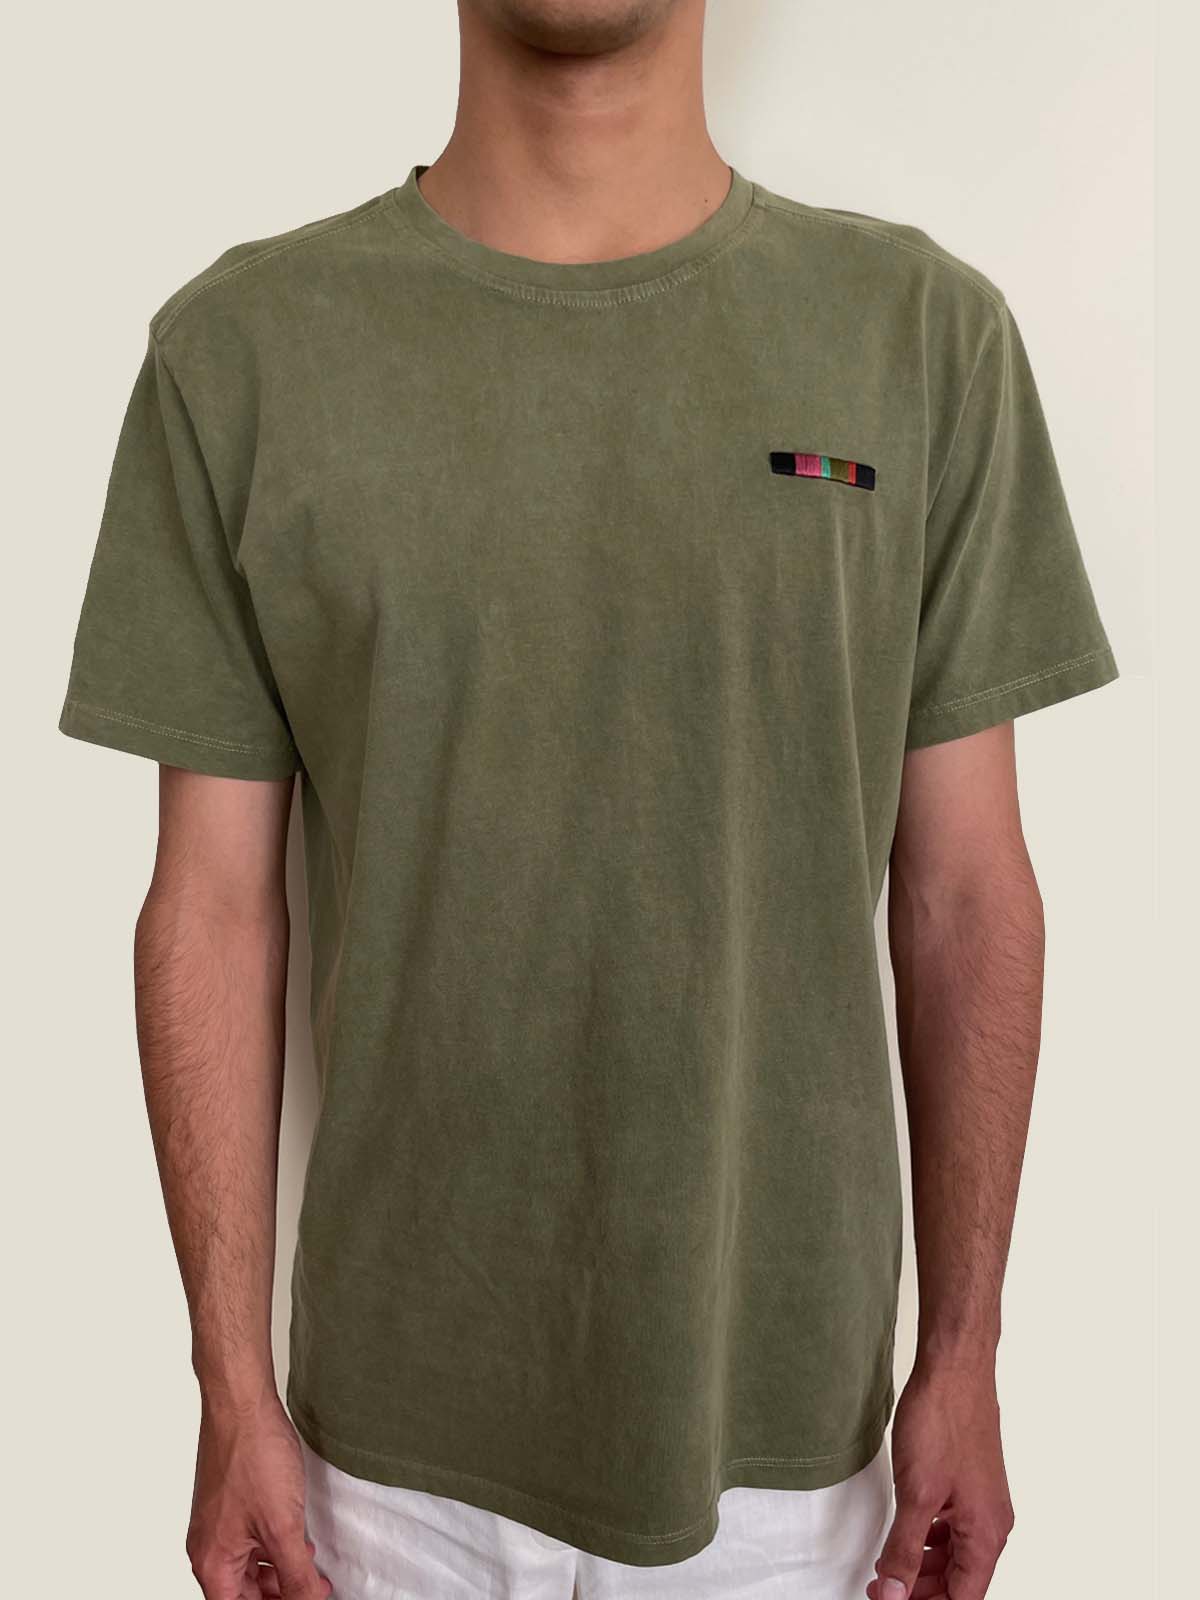 Olive green pas t-shirt